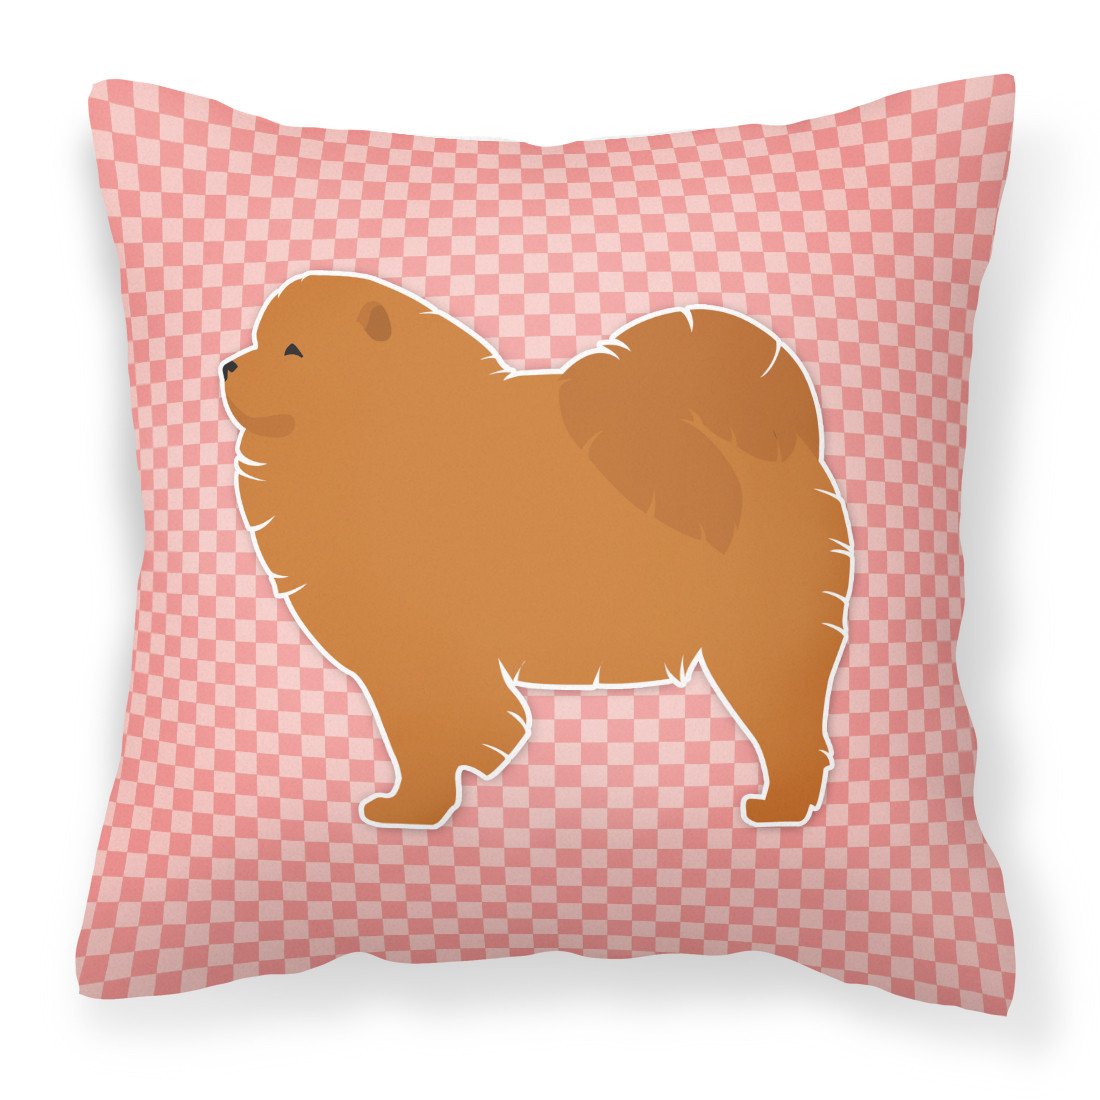 Chow Chow Checkerboard Pink Fabric Decorative Pillow BB3651PW1818 by Caroline's Treasures